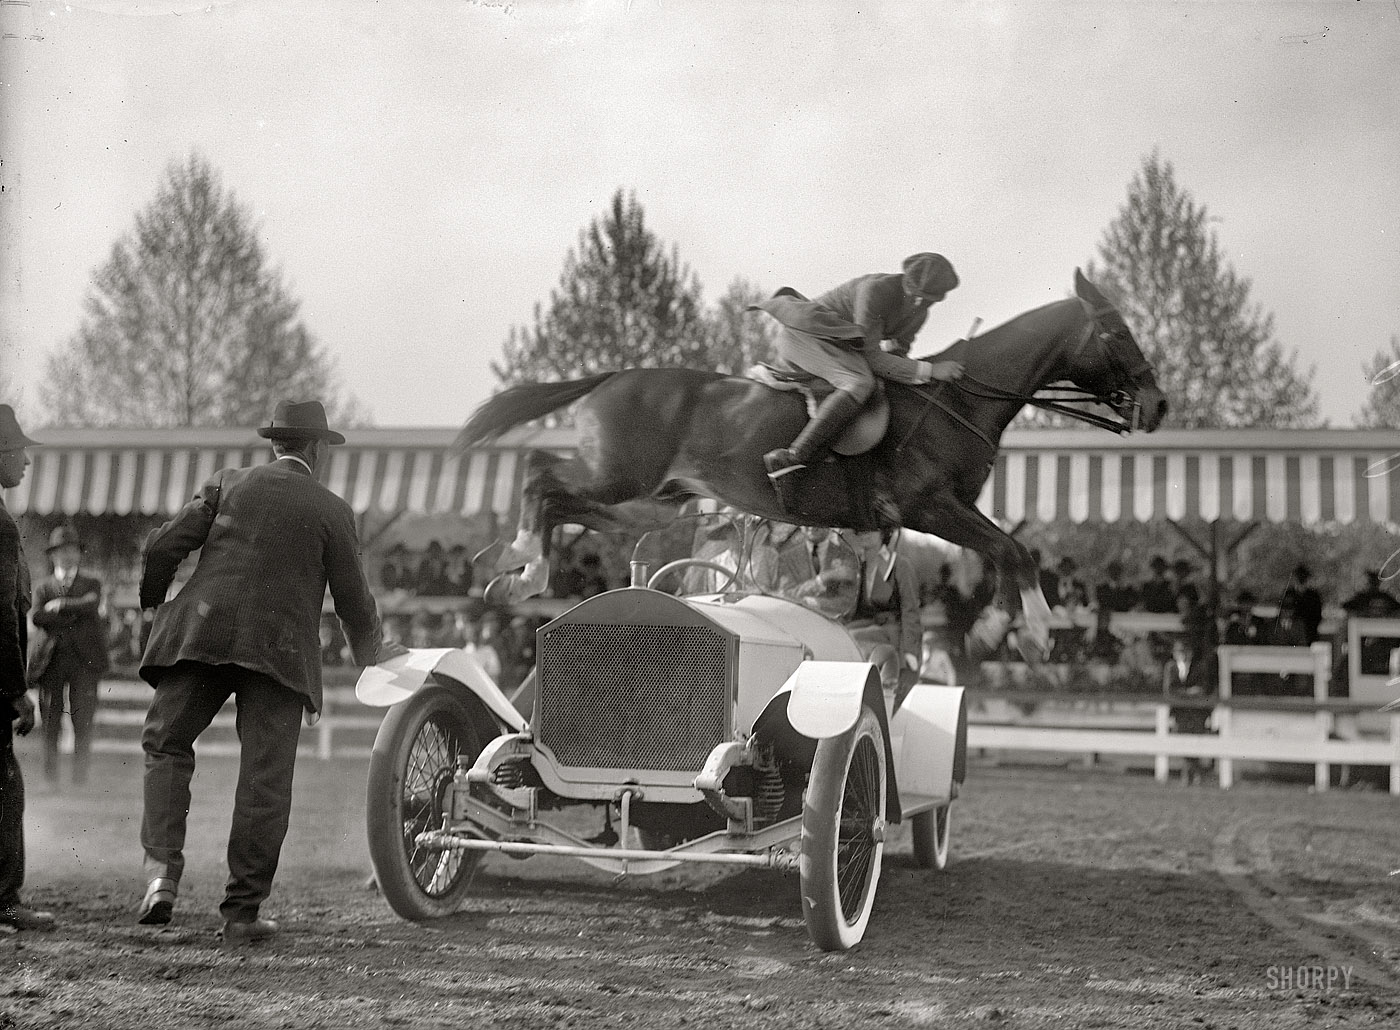 Washington, 1916. "Horse shows. Ralph Coffin jumping his horse over Sylvanus Stokes's Rolls-Royce on Rabbit." Harris & Ewing glass negative. View full size.